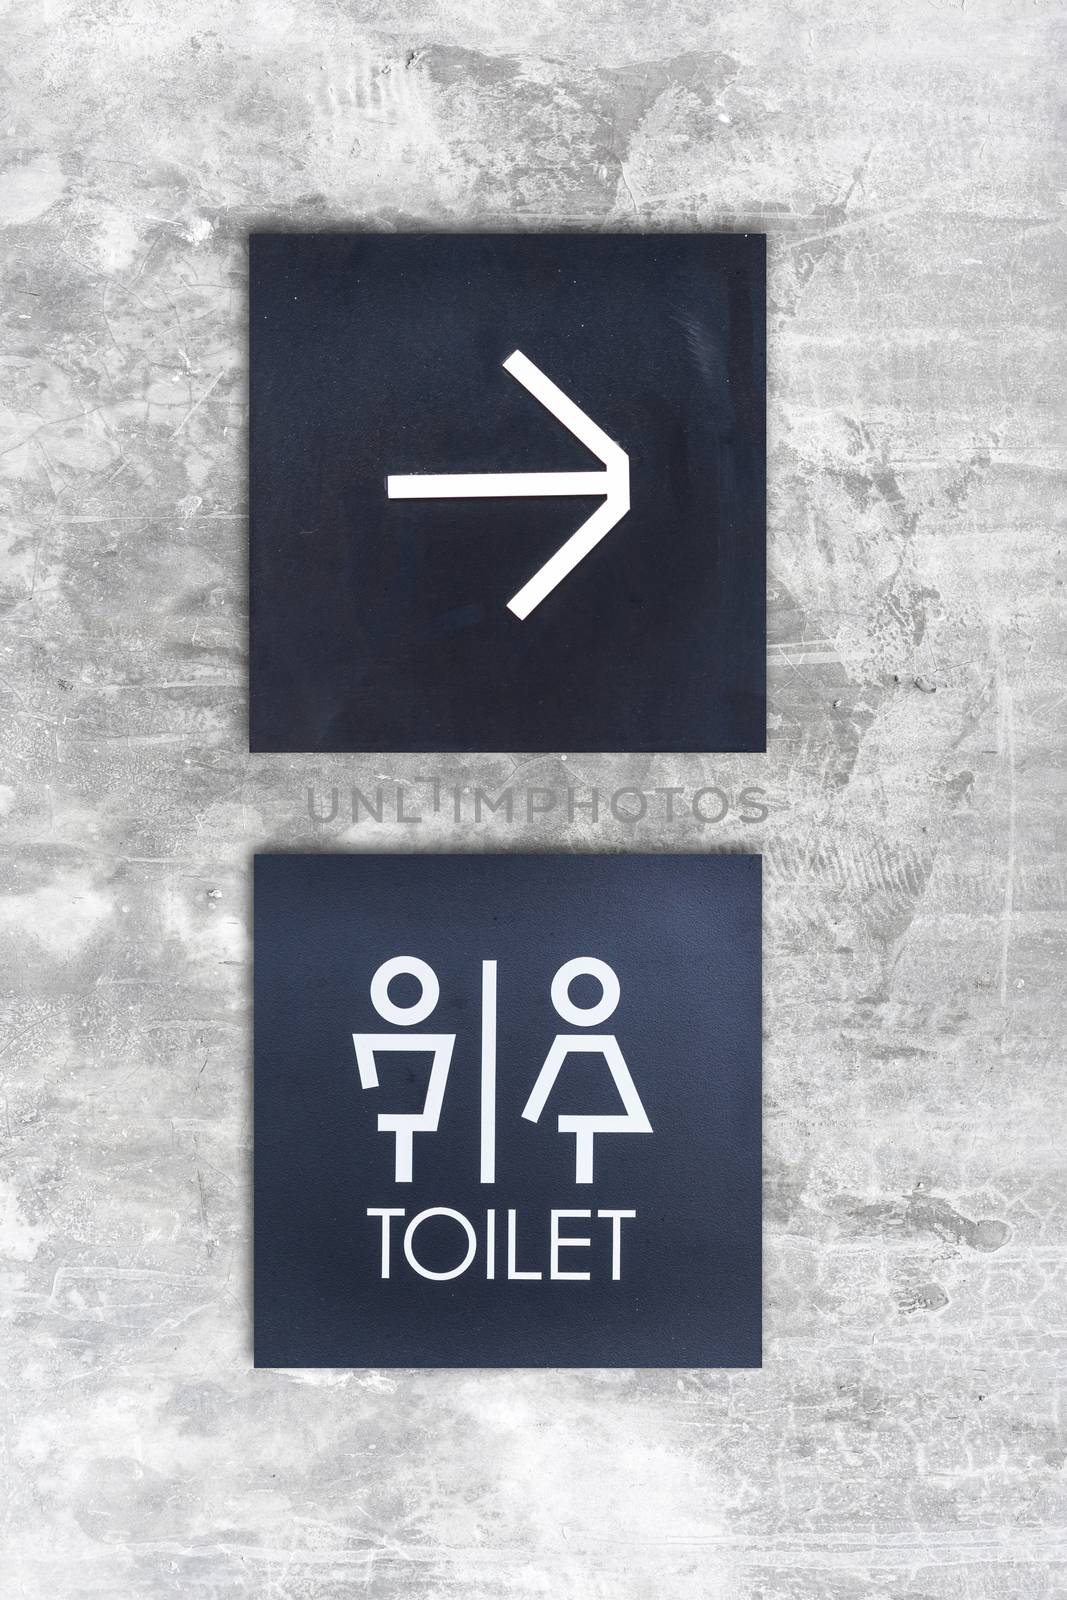 Unisex restroom or Toilet and arrow sign on concrete wall style boutique